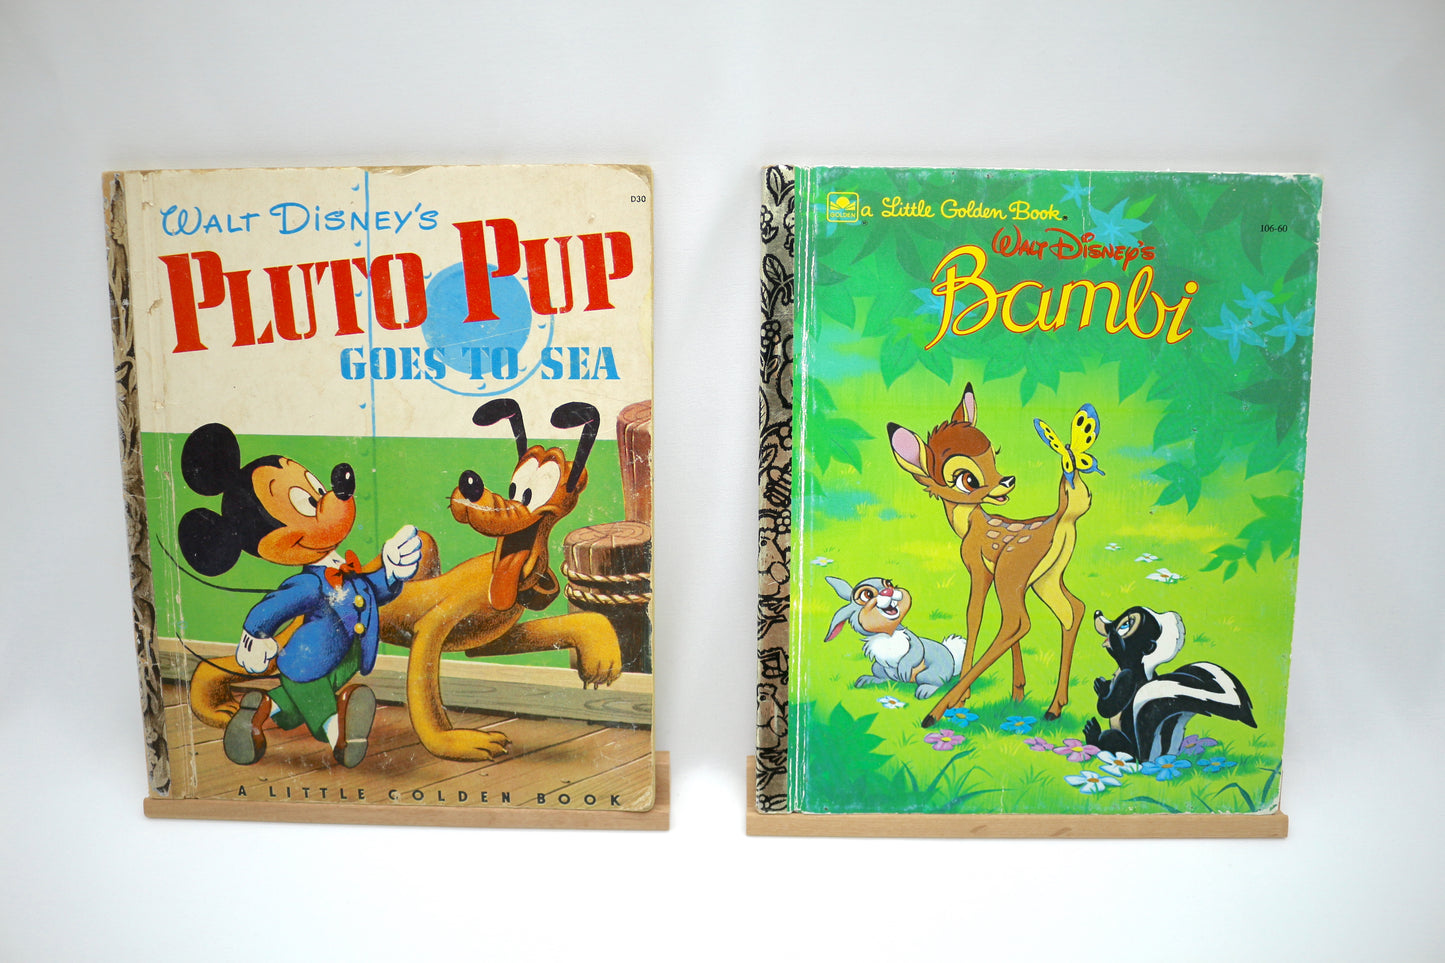 Little Golden Book Disney's Pluto Pup Goes to Sea OR Little Golden Book Disney's Bambi